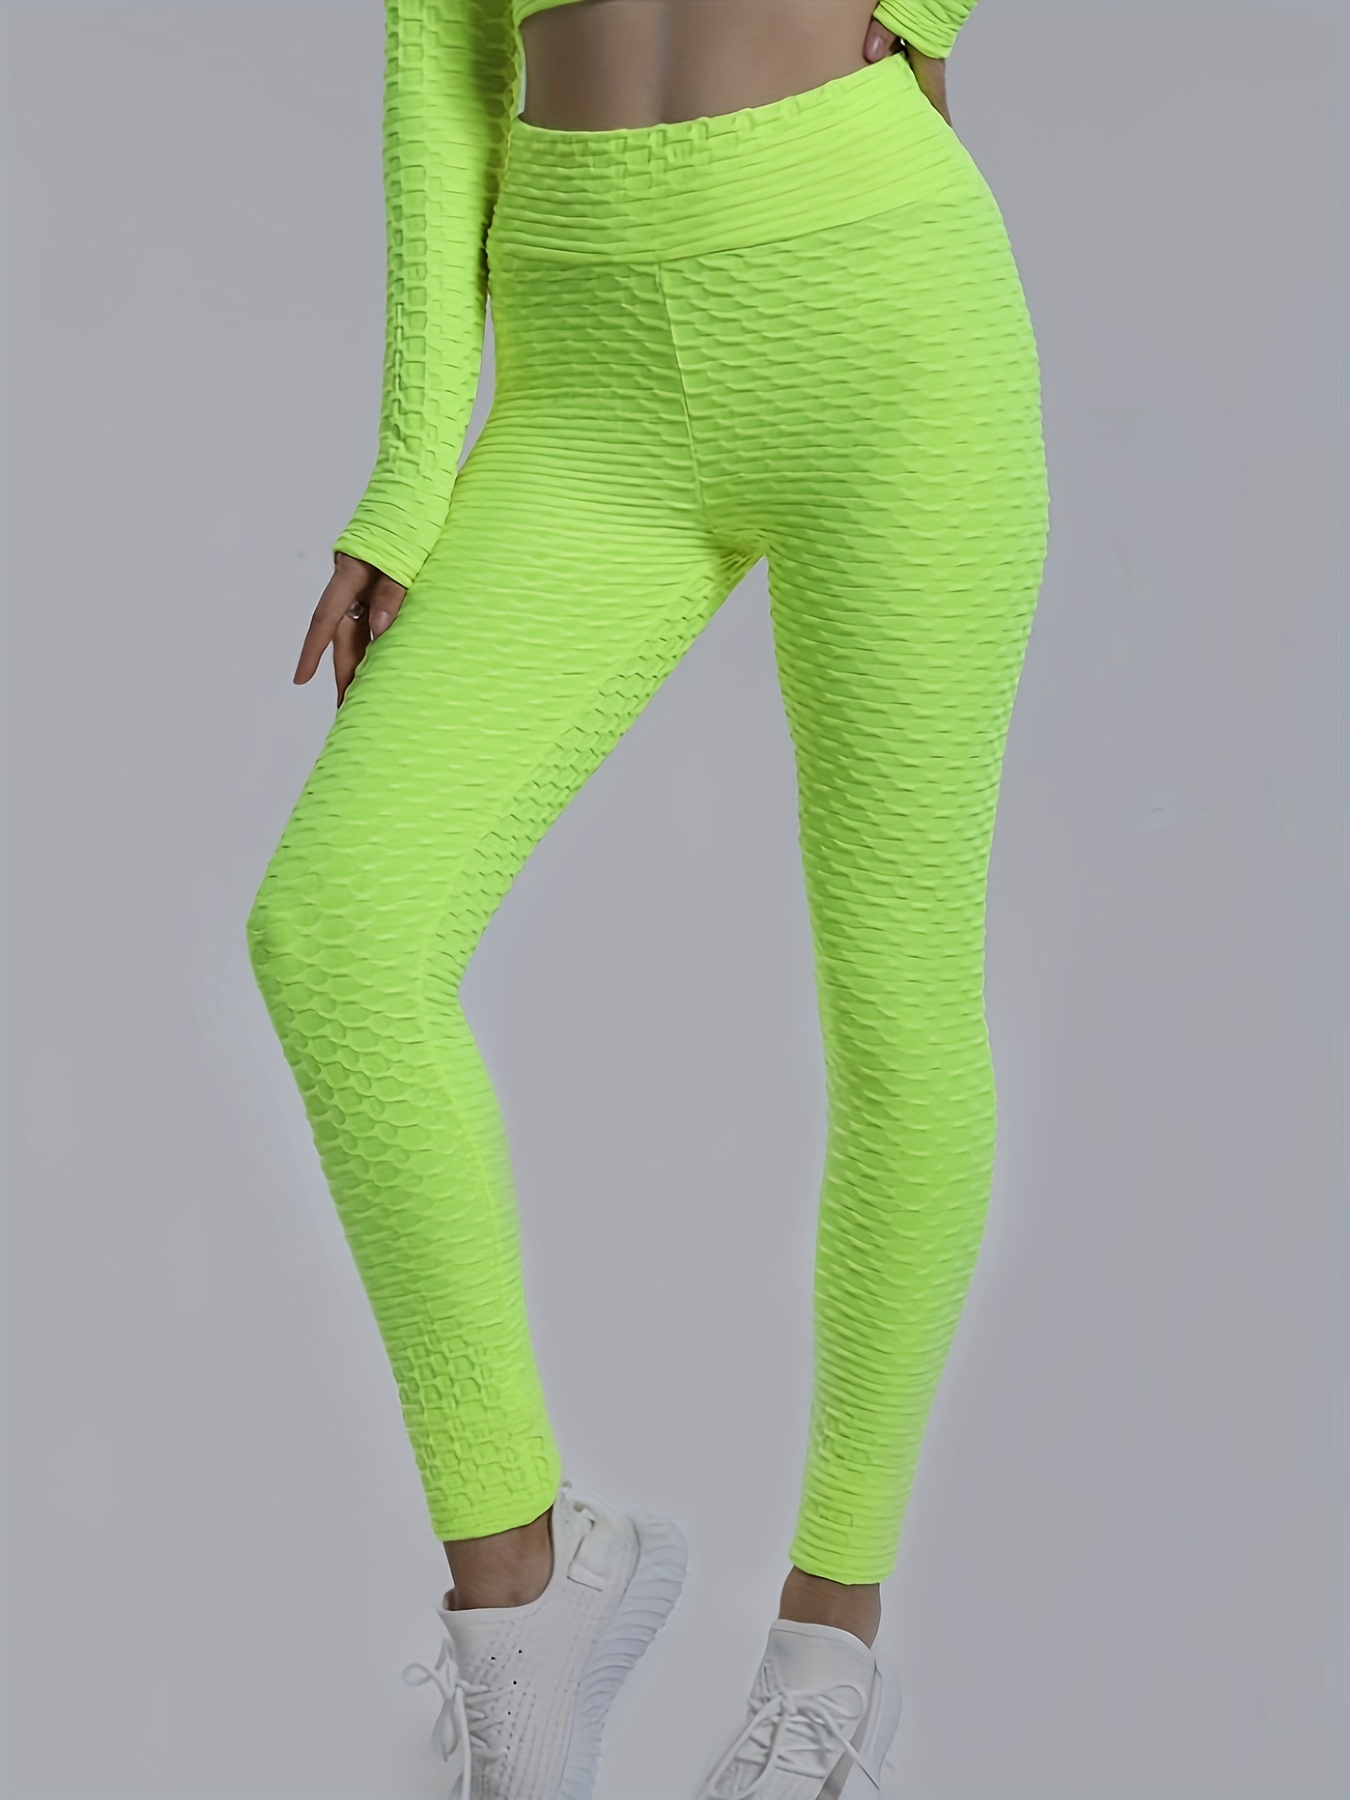 ADULT TIGHTS FULL LENGTH, PLAIN COLORS NEON GREEN